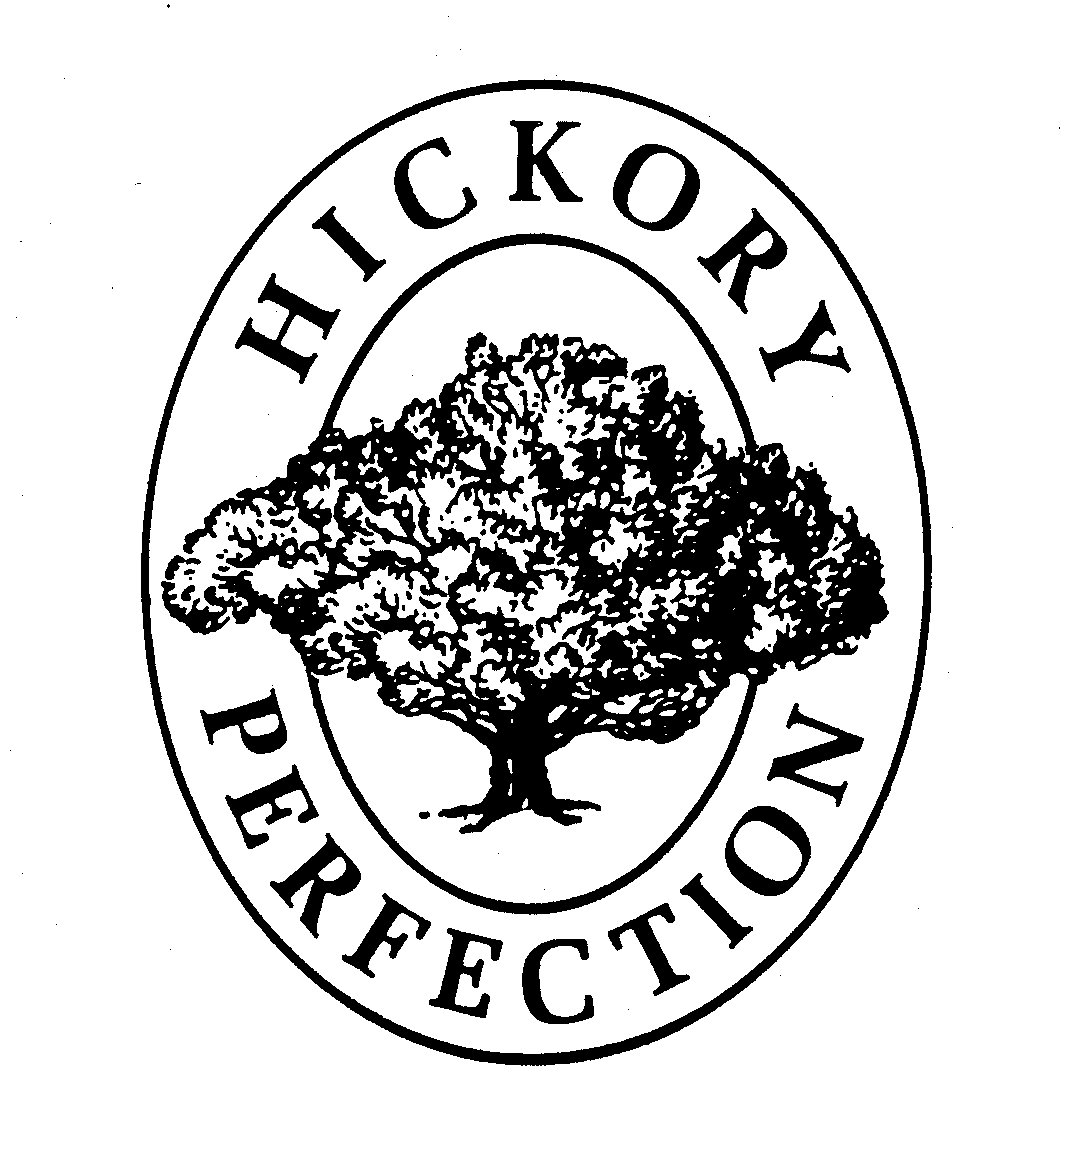  HICKORY PERFECTION